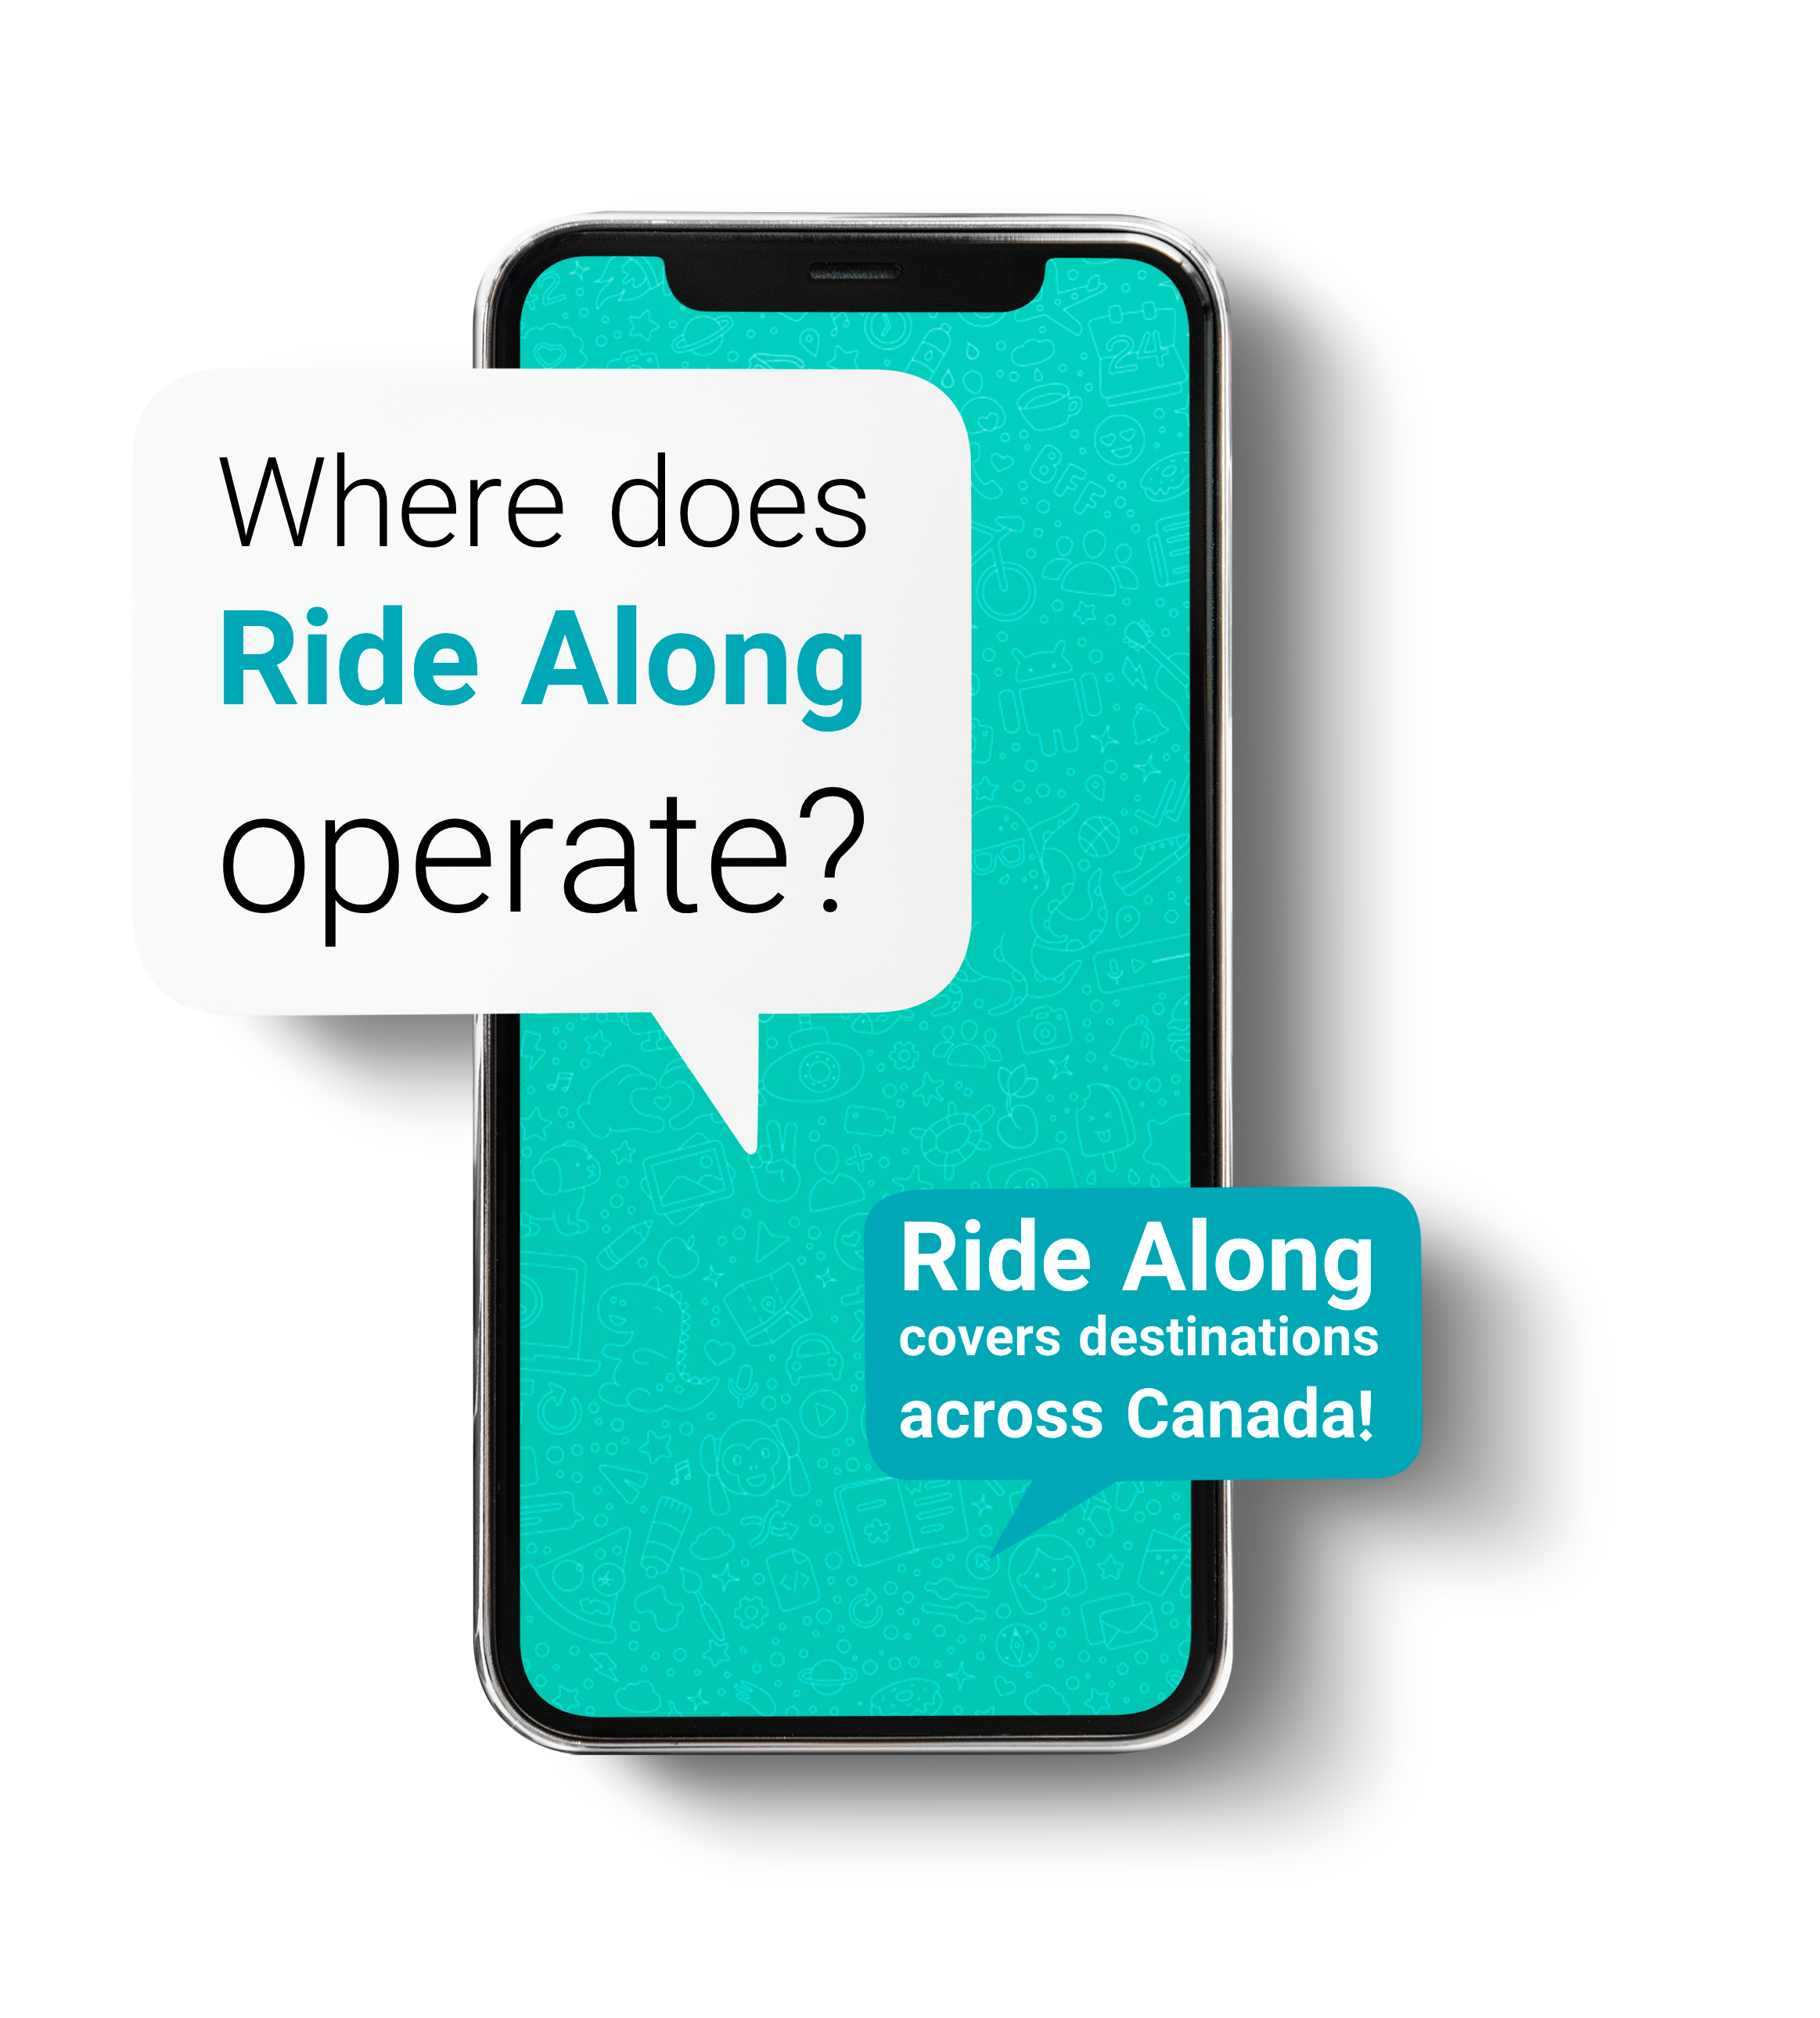 Where does Ride Along operate?